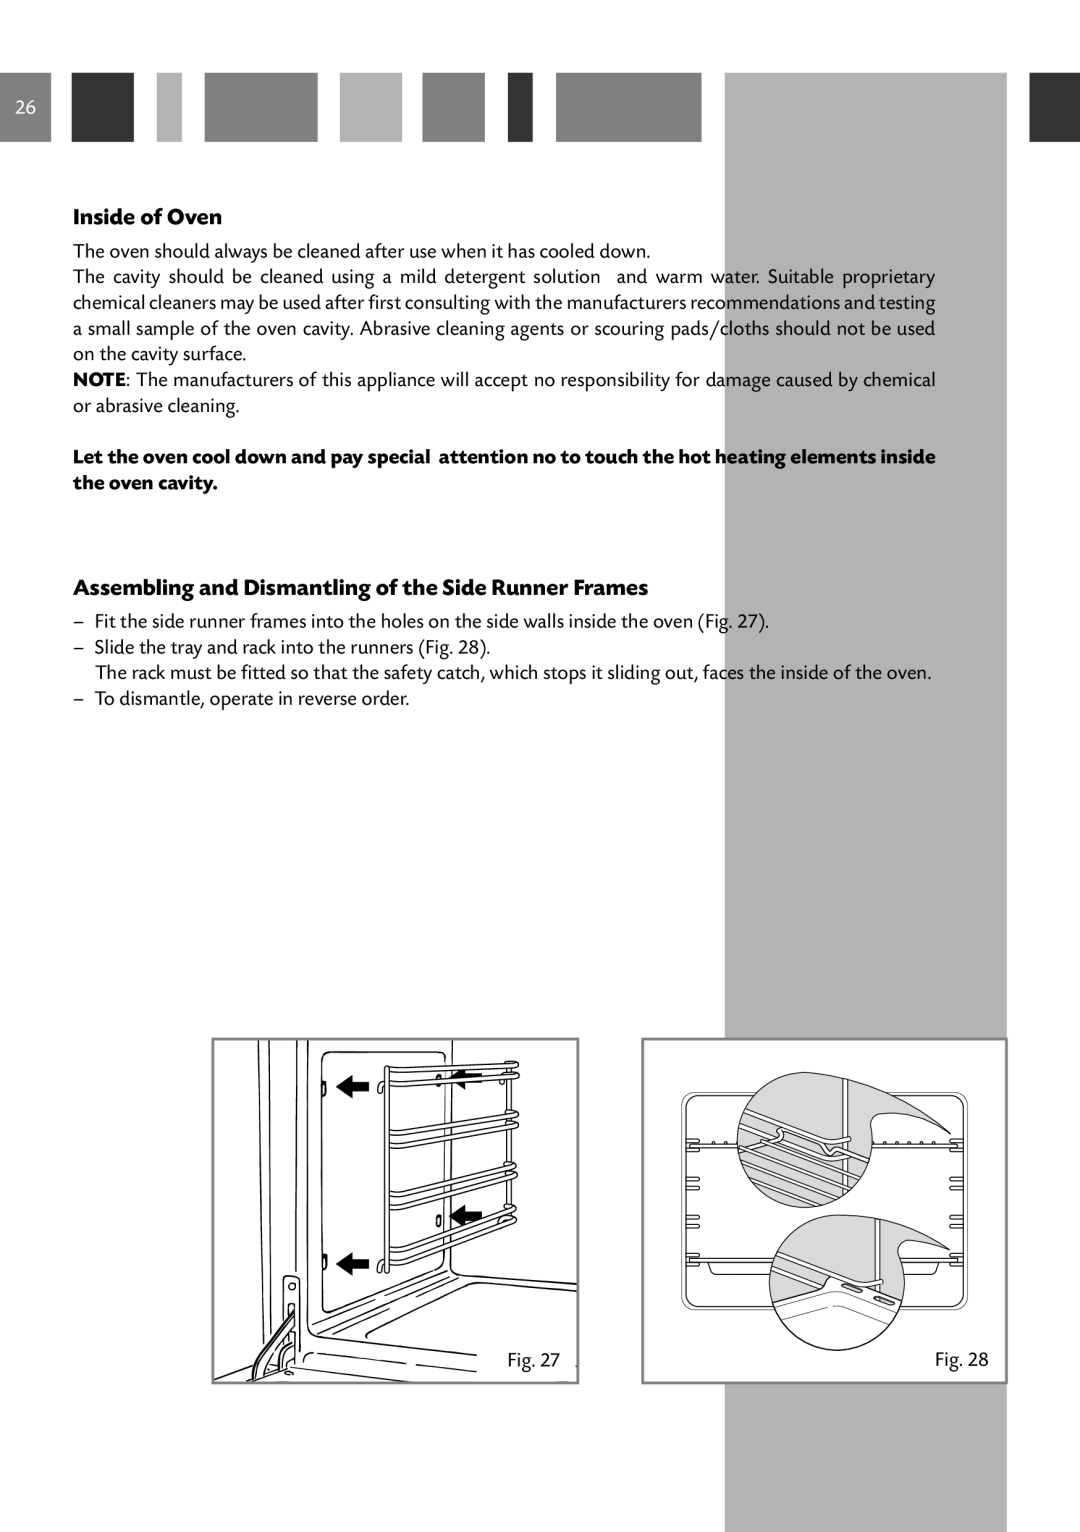 CDA RC 9620 manual Inside of Oven, Assembling and Dismantling of the Side Runner Frames 